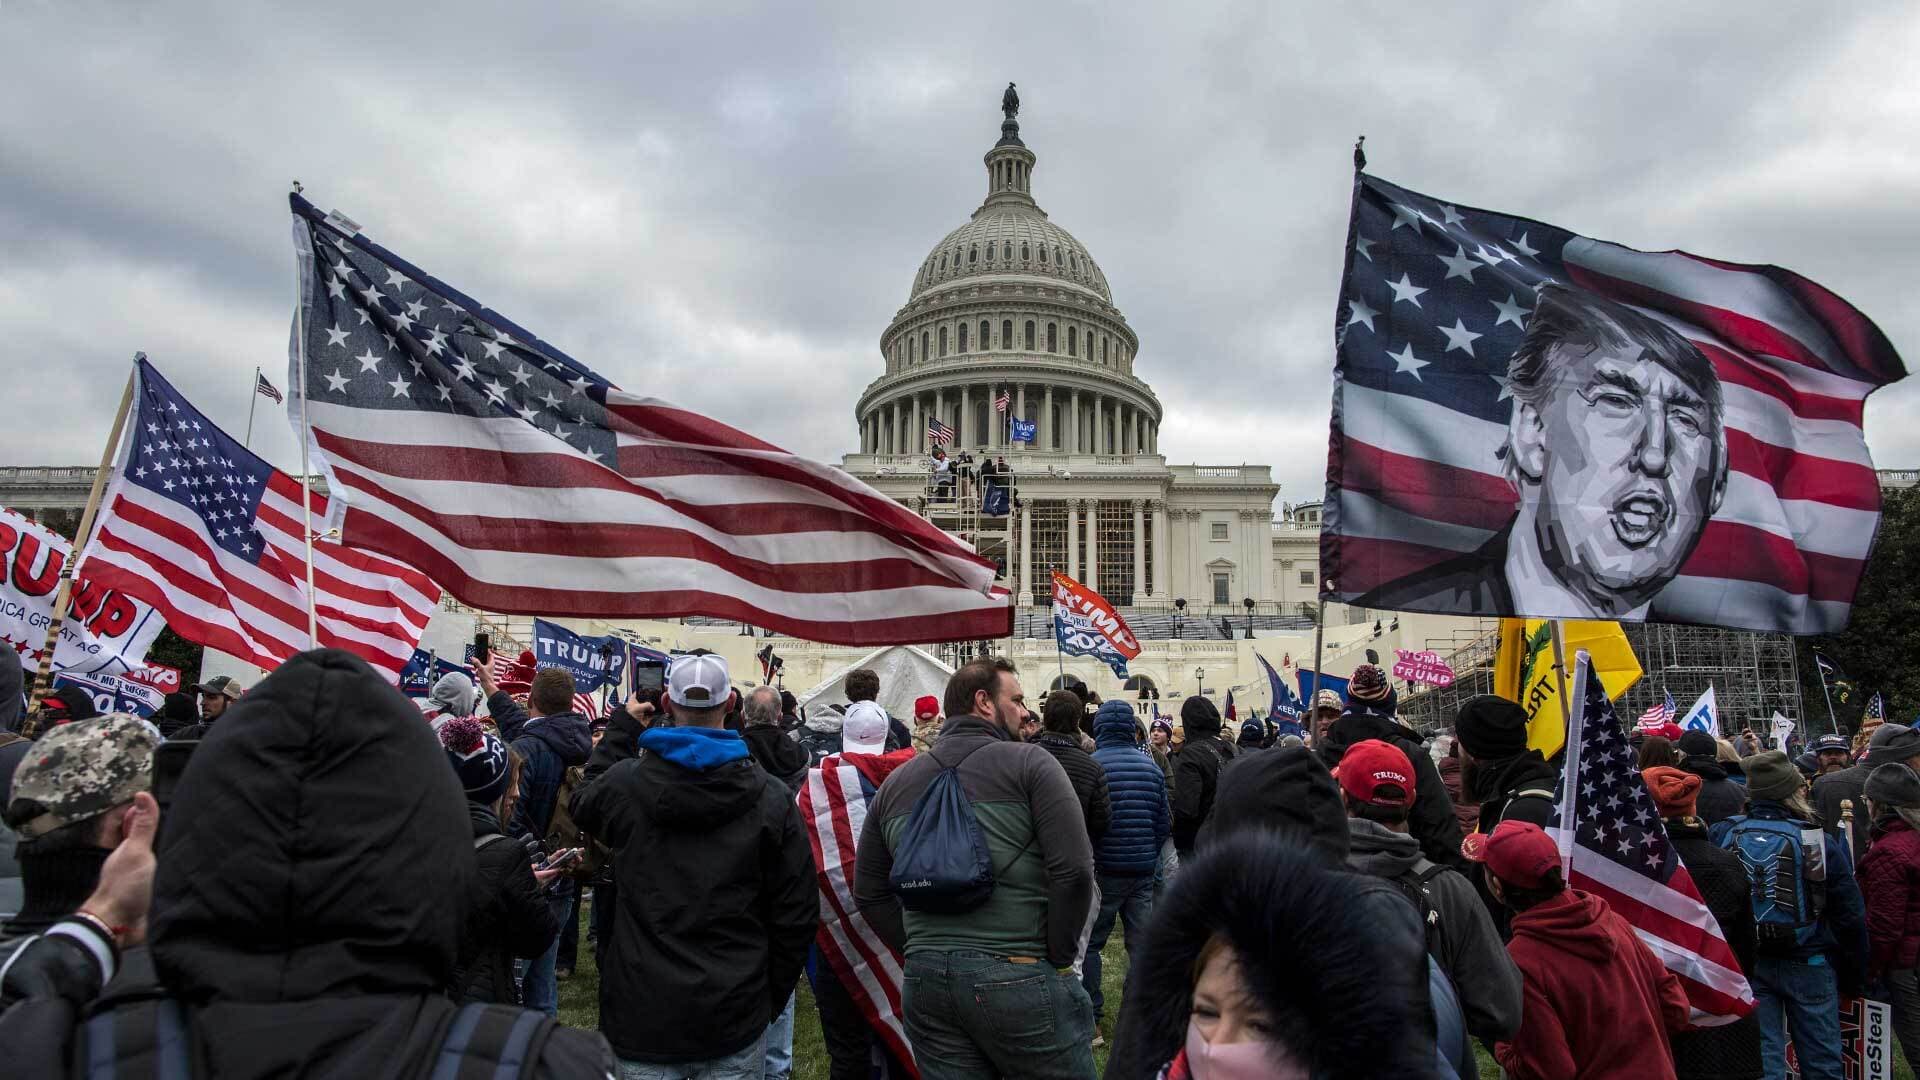 President Donald Trump's supporters converge on the Capitol building on Jan. 6, when rioters stormed the building as lawmakers were set to certify President-elect Joe Biden's electoral victory in what was supposed to be a routine process headed to Inauguration Day.